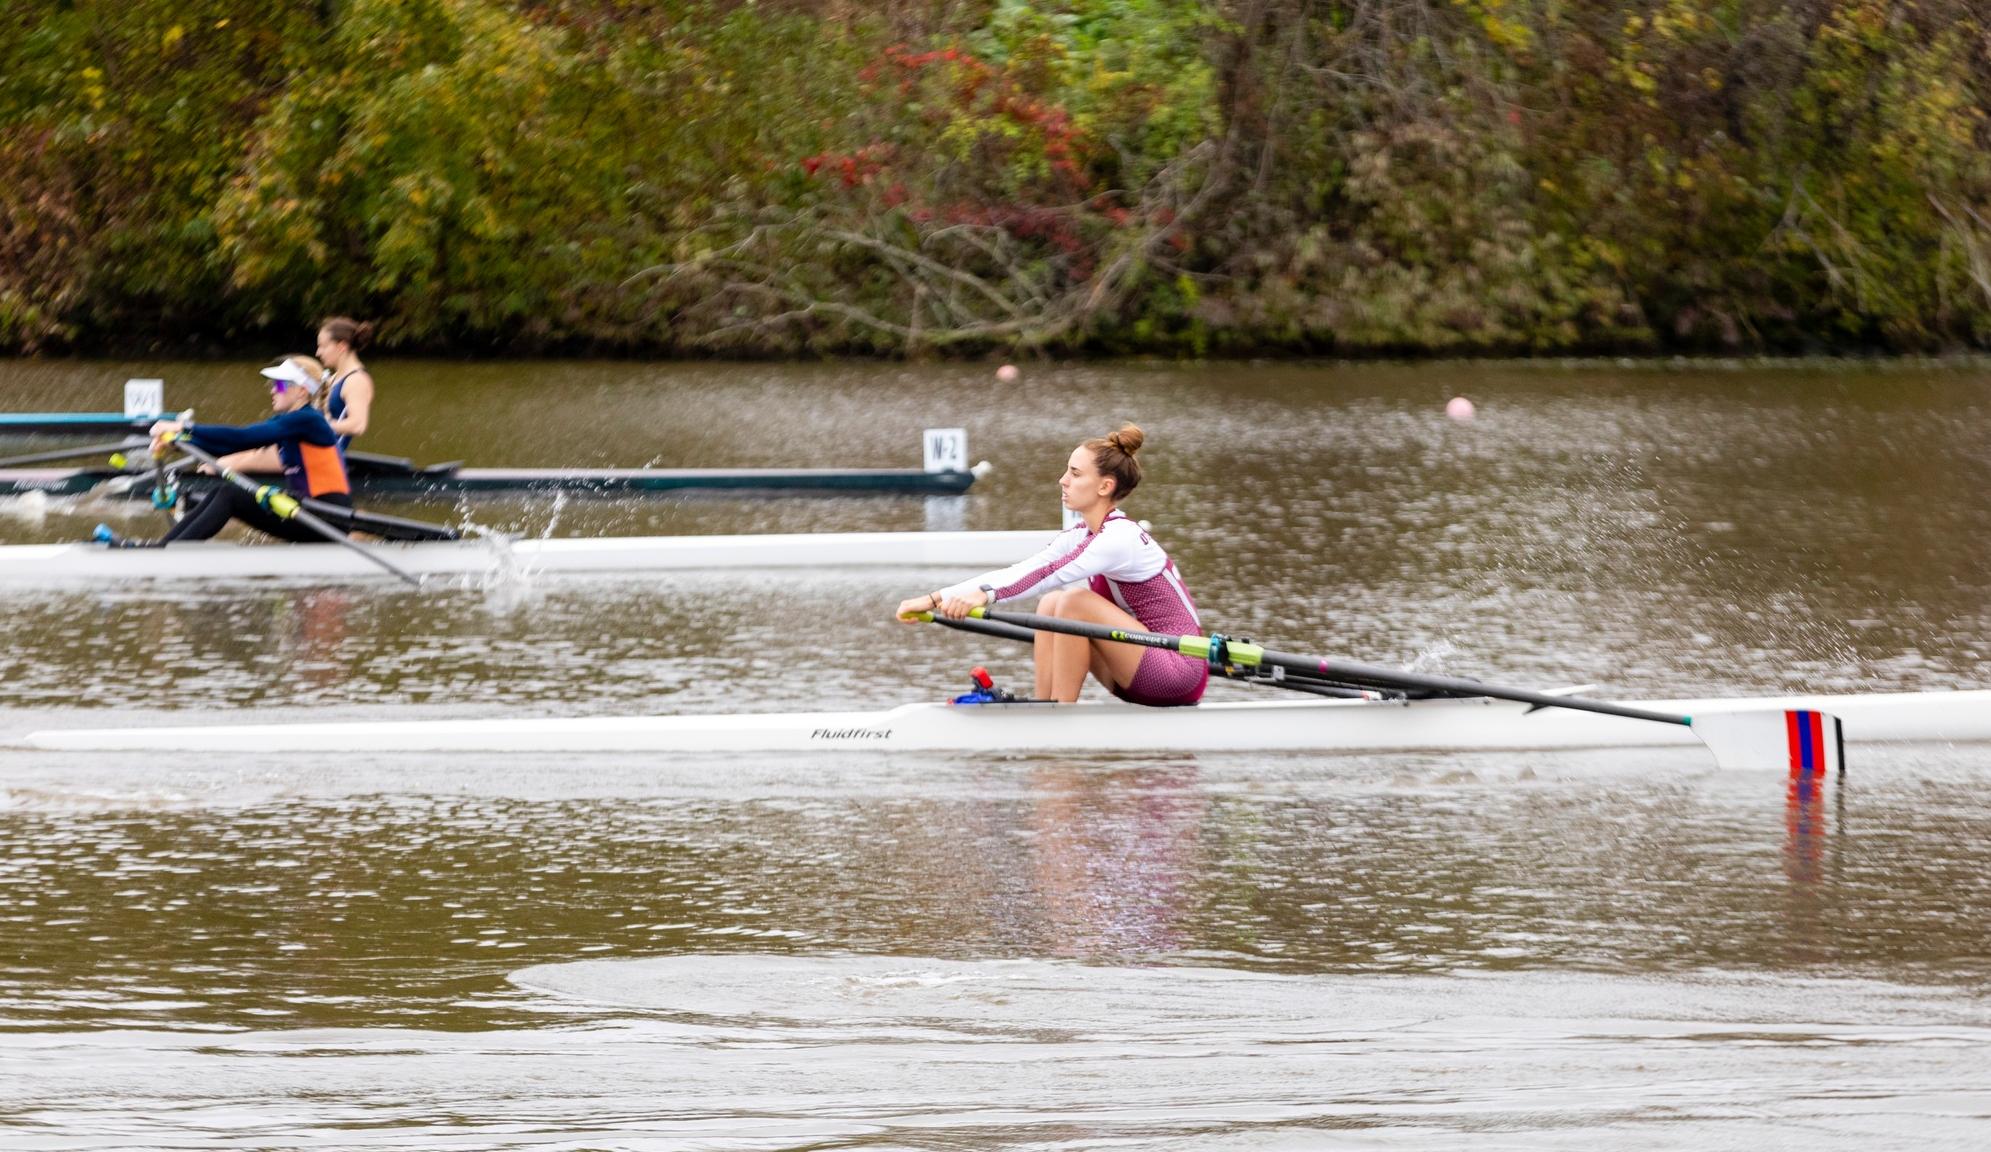 Gee-Gees on podium in three events at OUA Championship, claim gold in women&rsquo;s 4+